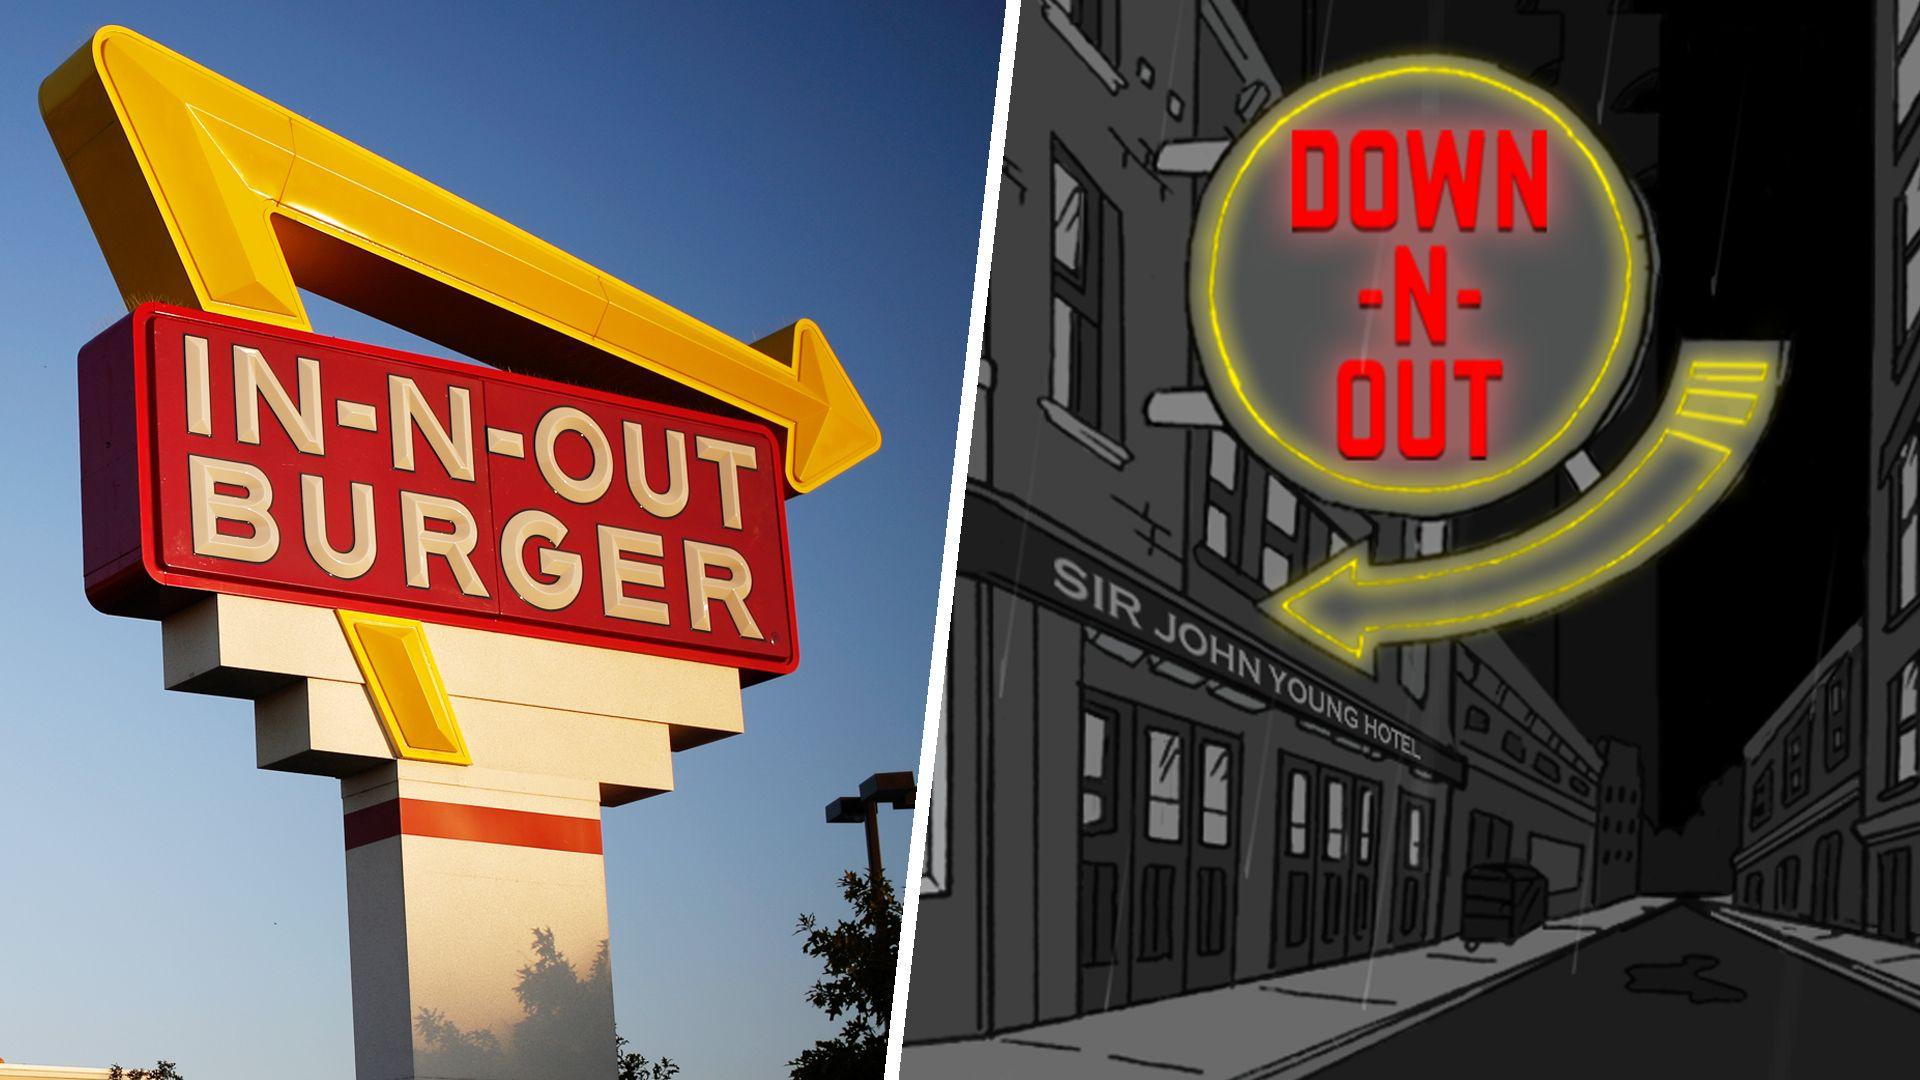 In N Out Logo - In-N-Out sues Australian burger joint Down N' Out